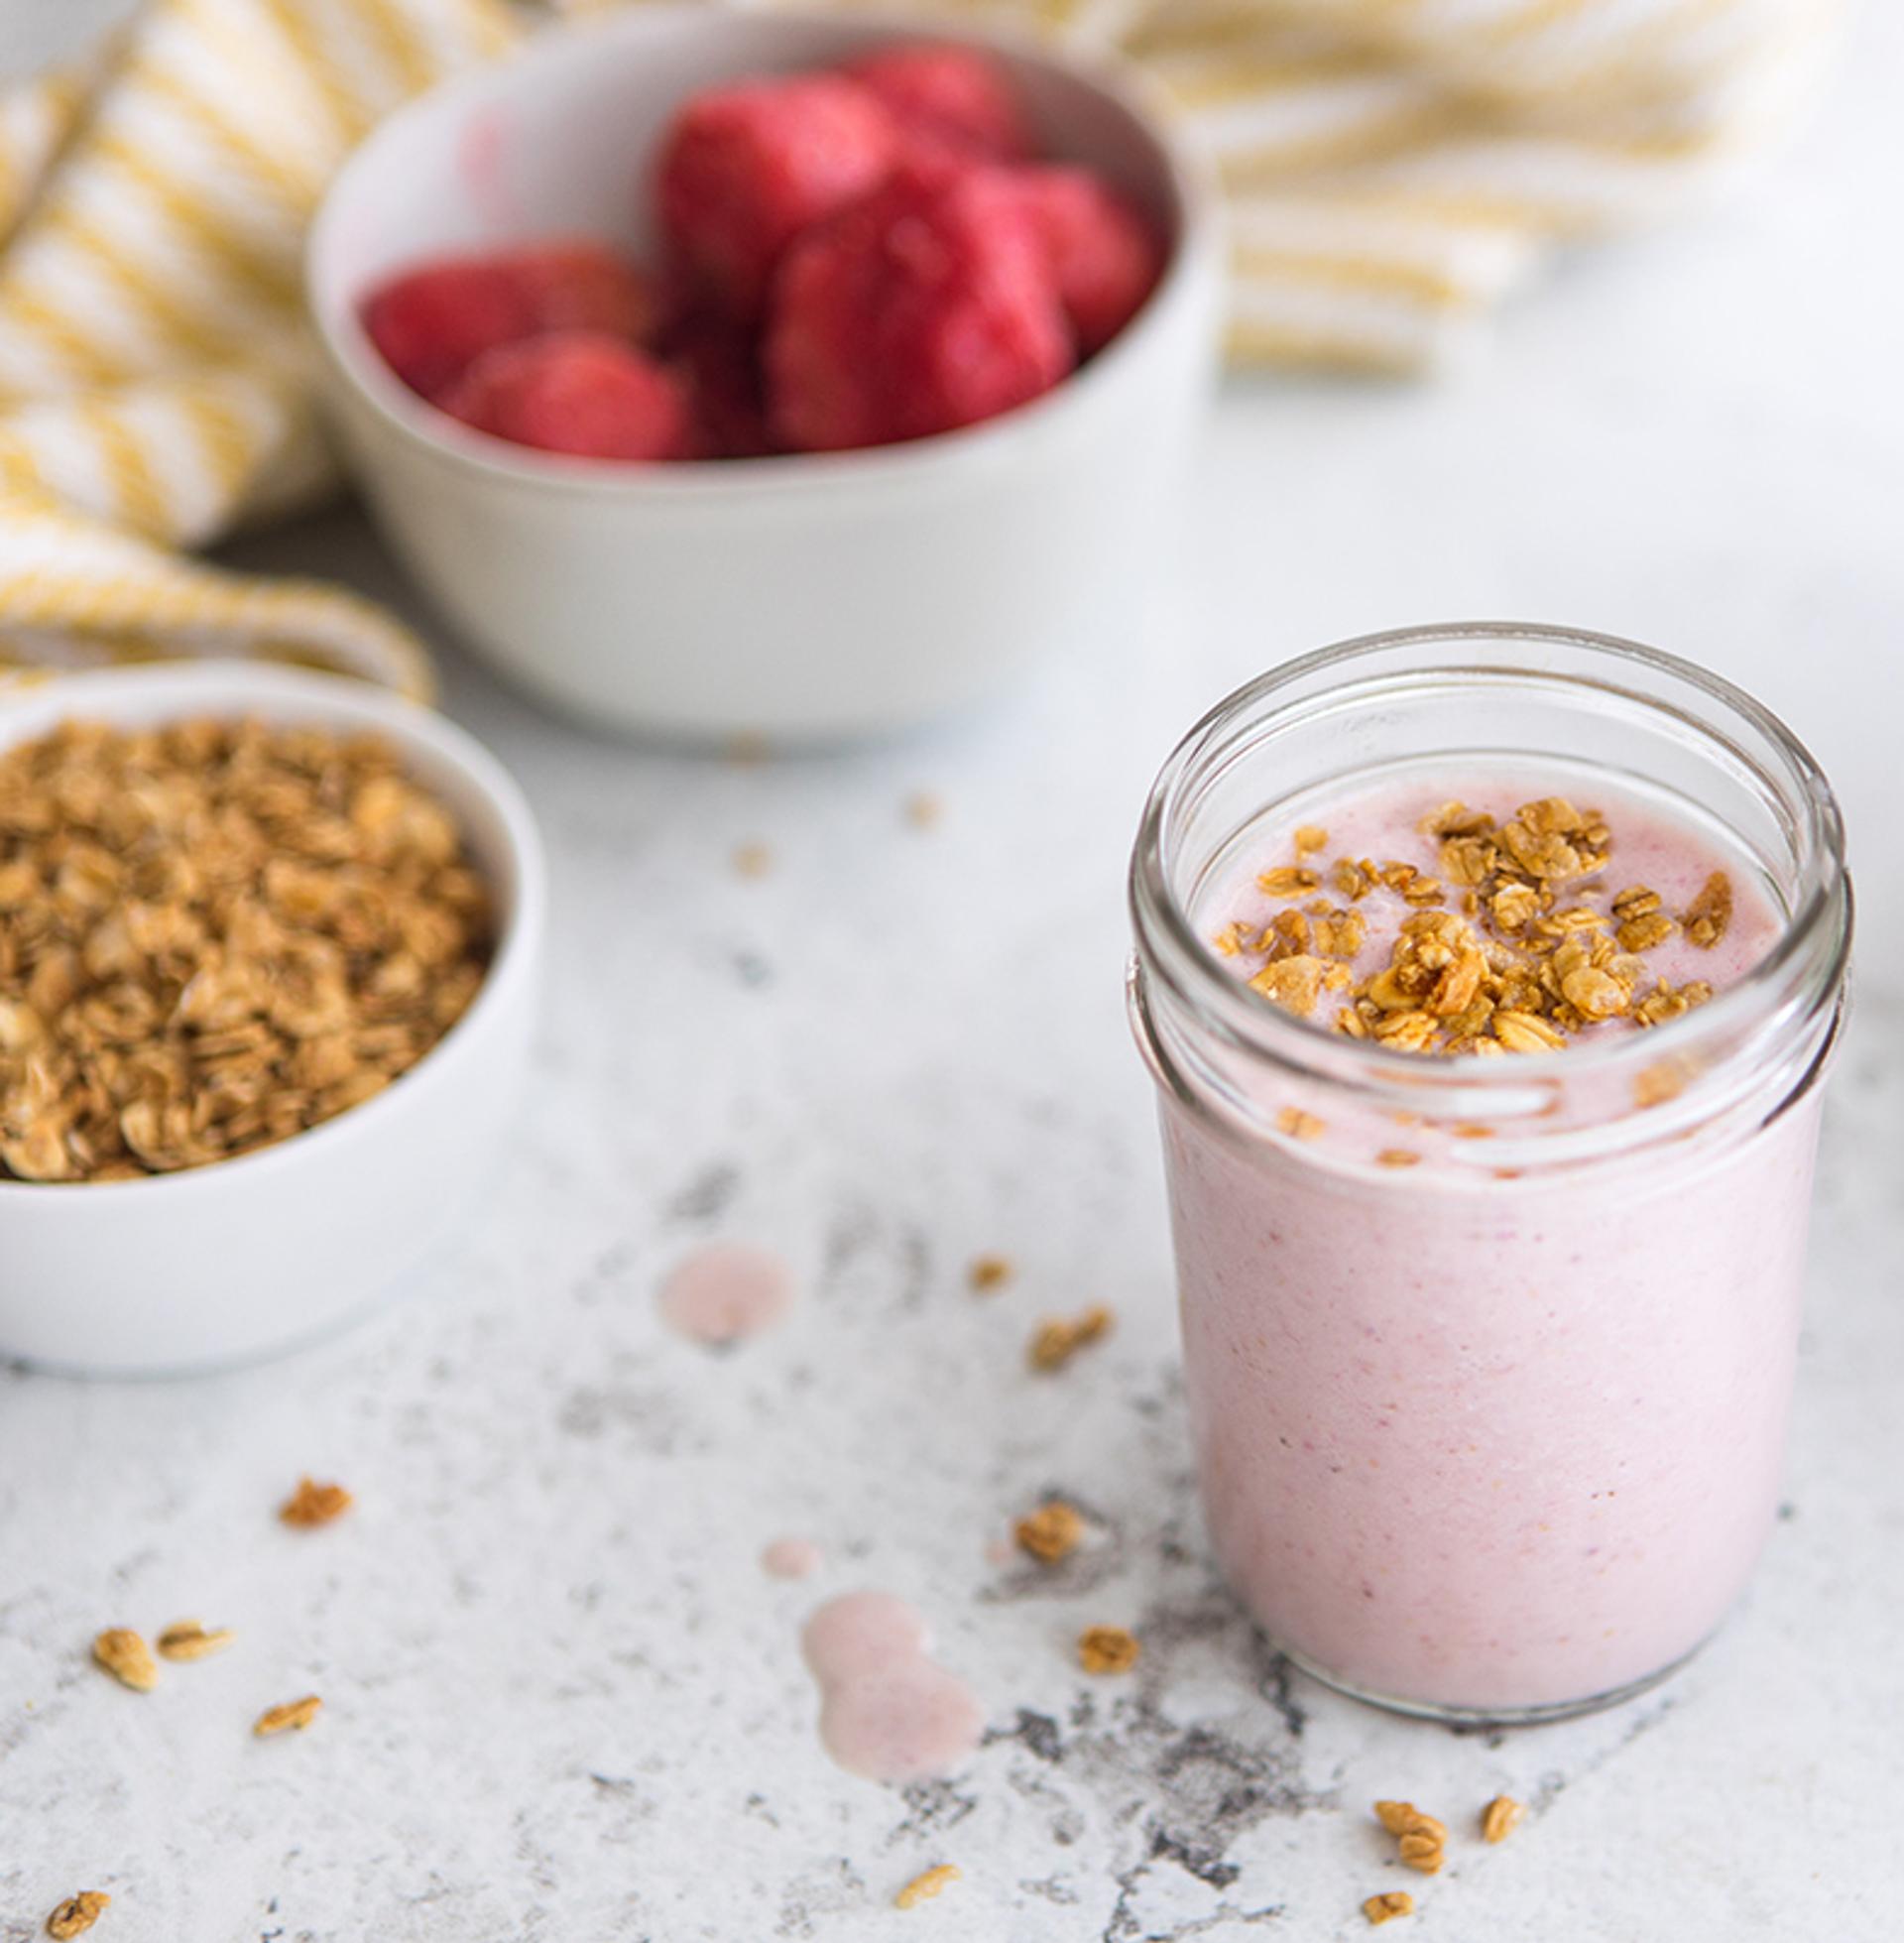 Strawberry Banana smoothie topped with granola sits on a marble countertop with Organic Valley milk and granola.